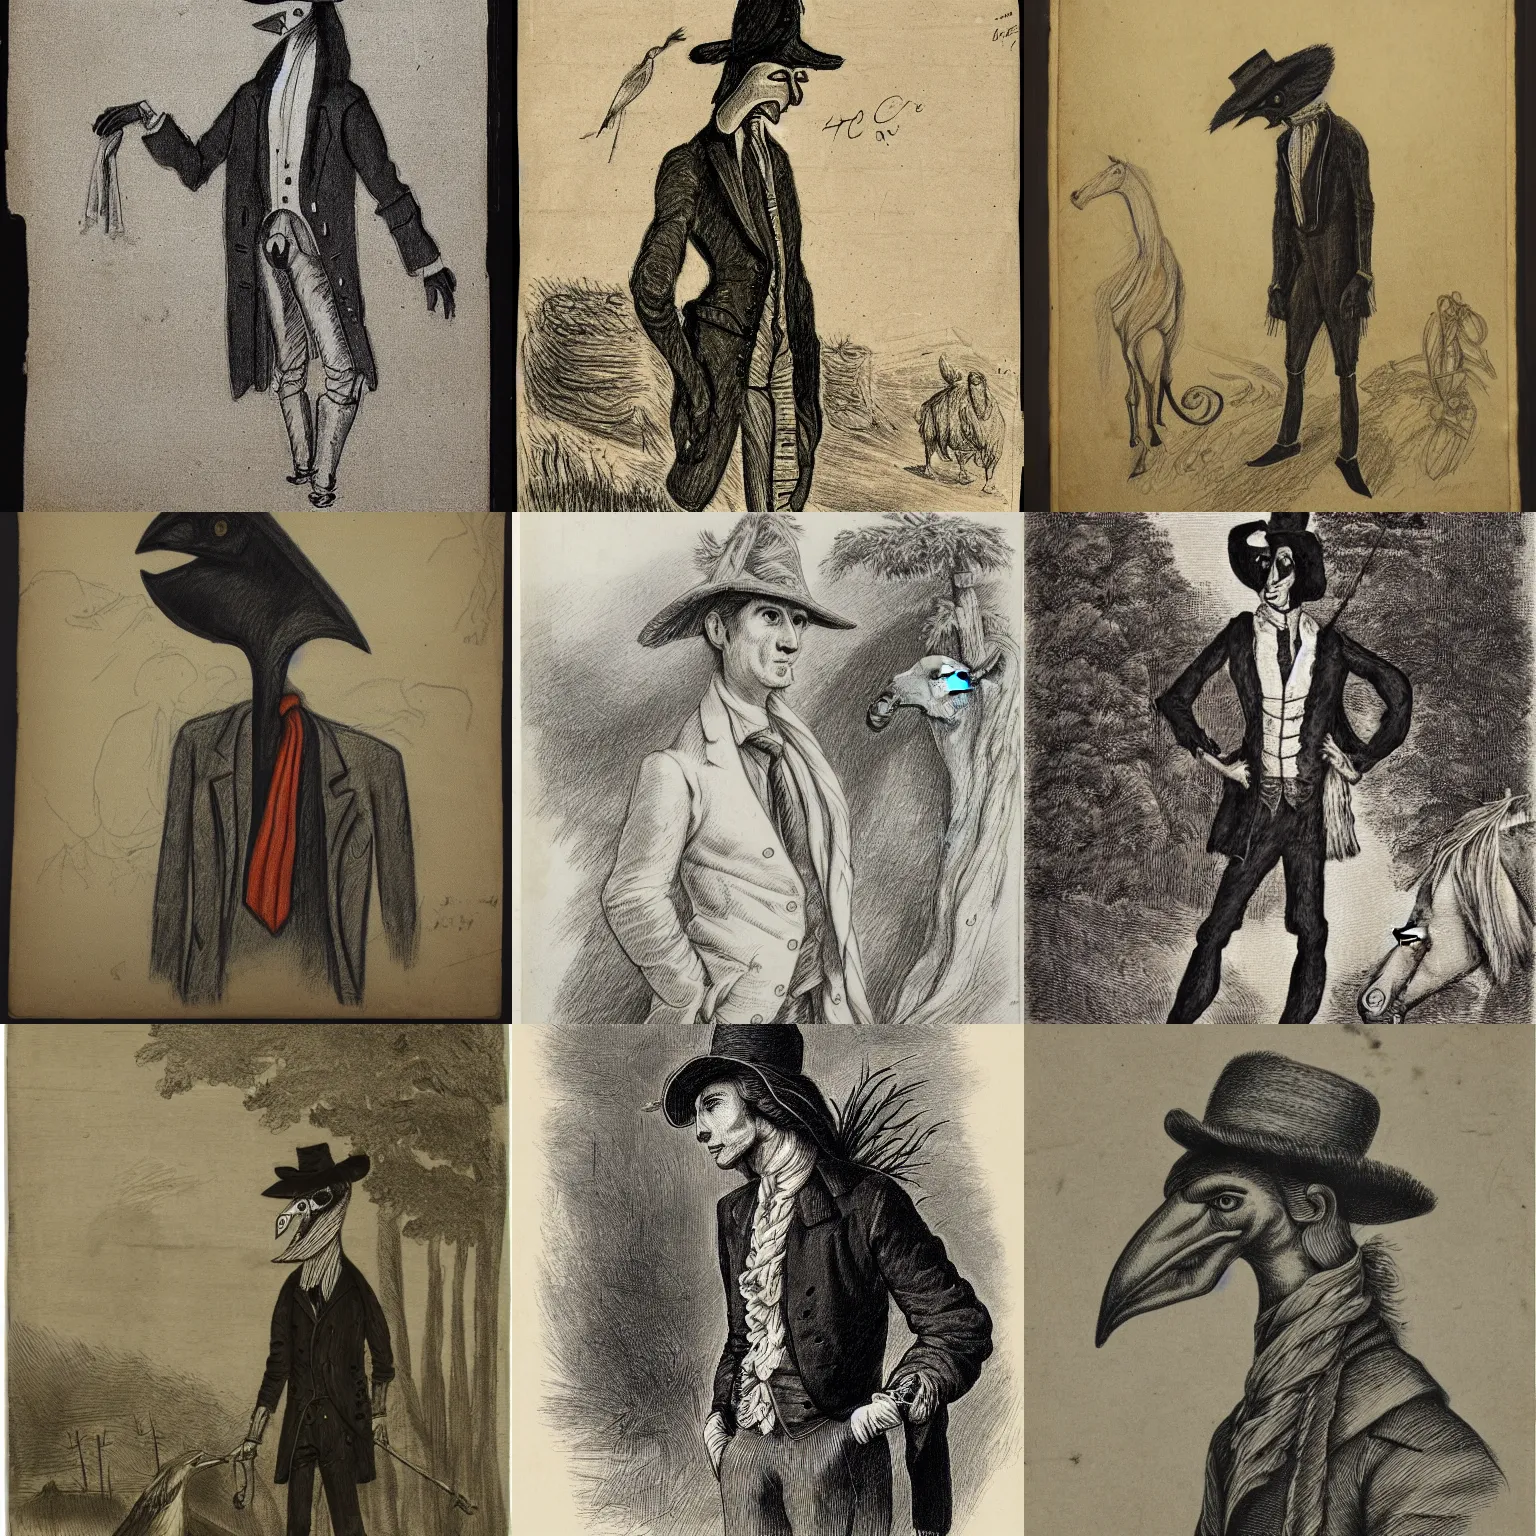 Image similar to crow - like humanoid with long neck and equine face, forest of neckties, straw hat and overcoat, bucolic, rococo, sketch